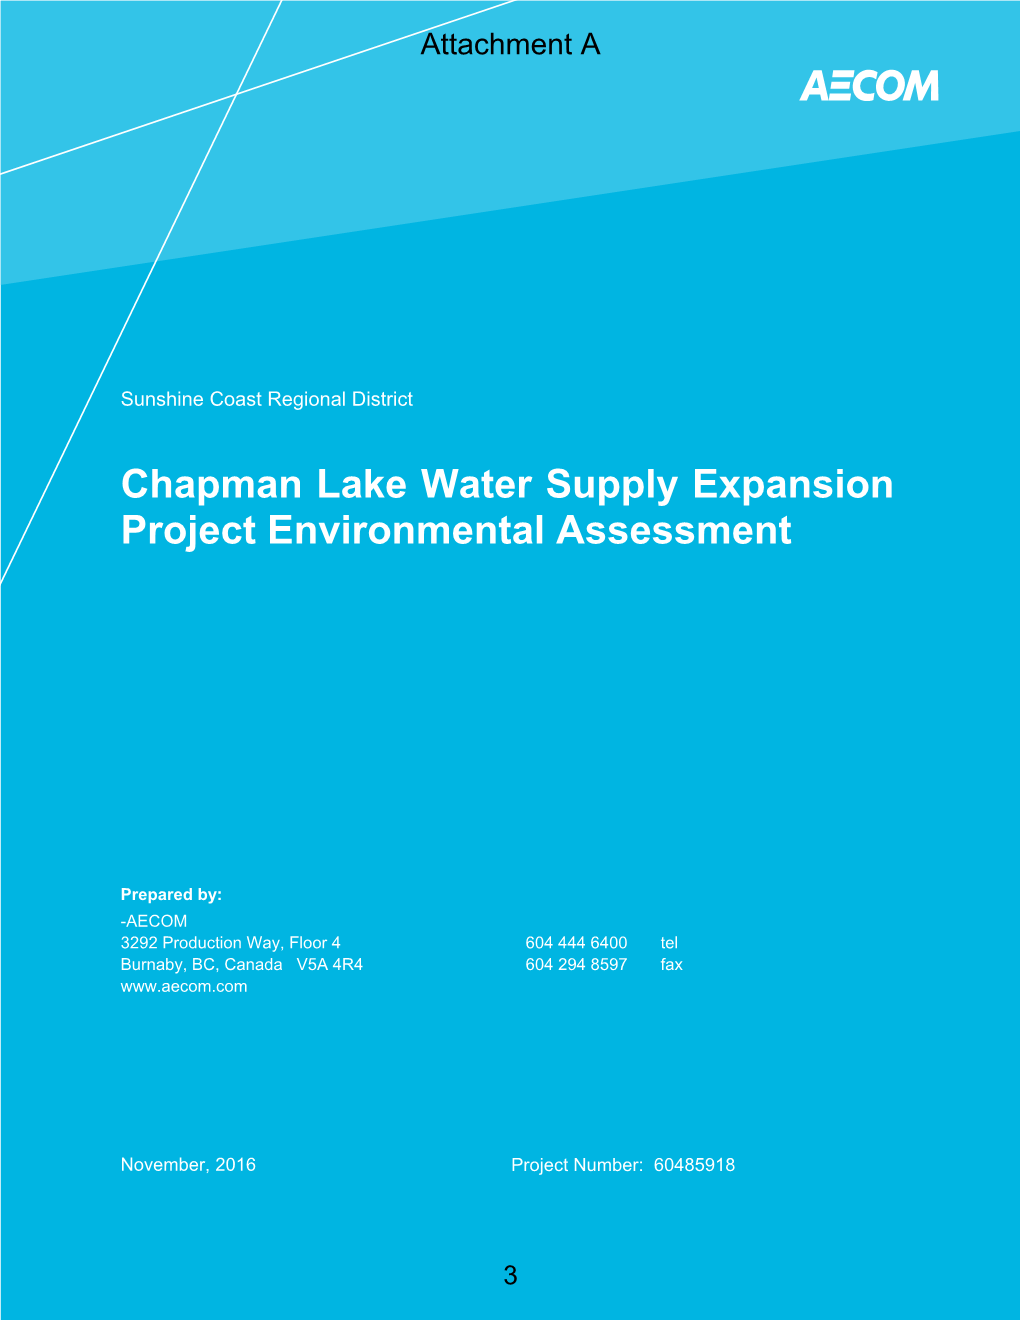 Chapman Lake Water Supply Expansion Project Environmental Assessment